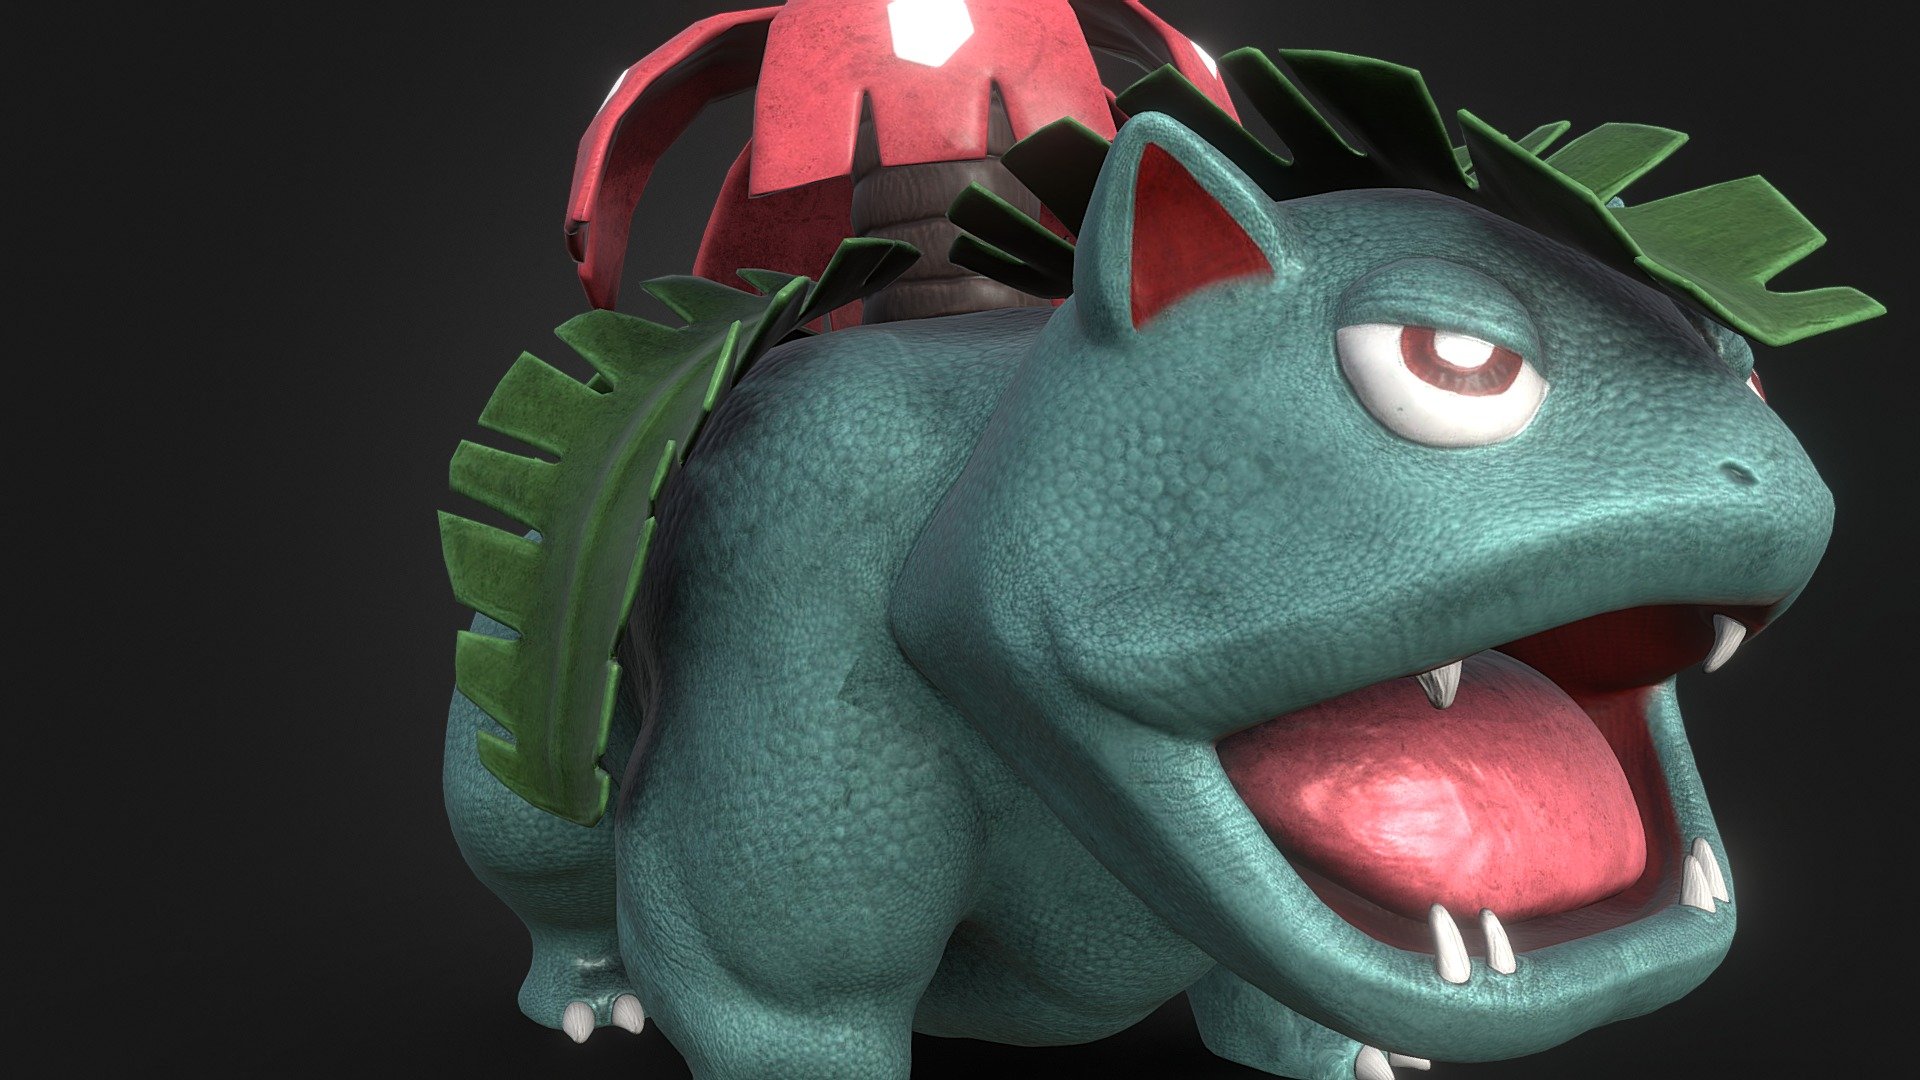 3D Model of Venusaur, a well known Pokemon.
Softwares used are 3DS Max, Zbrush, Substance Painter 3d model